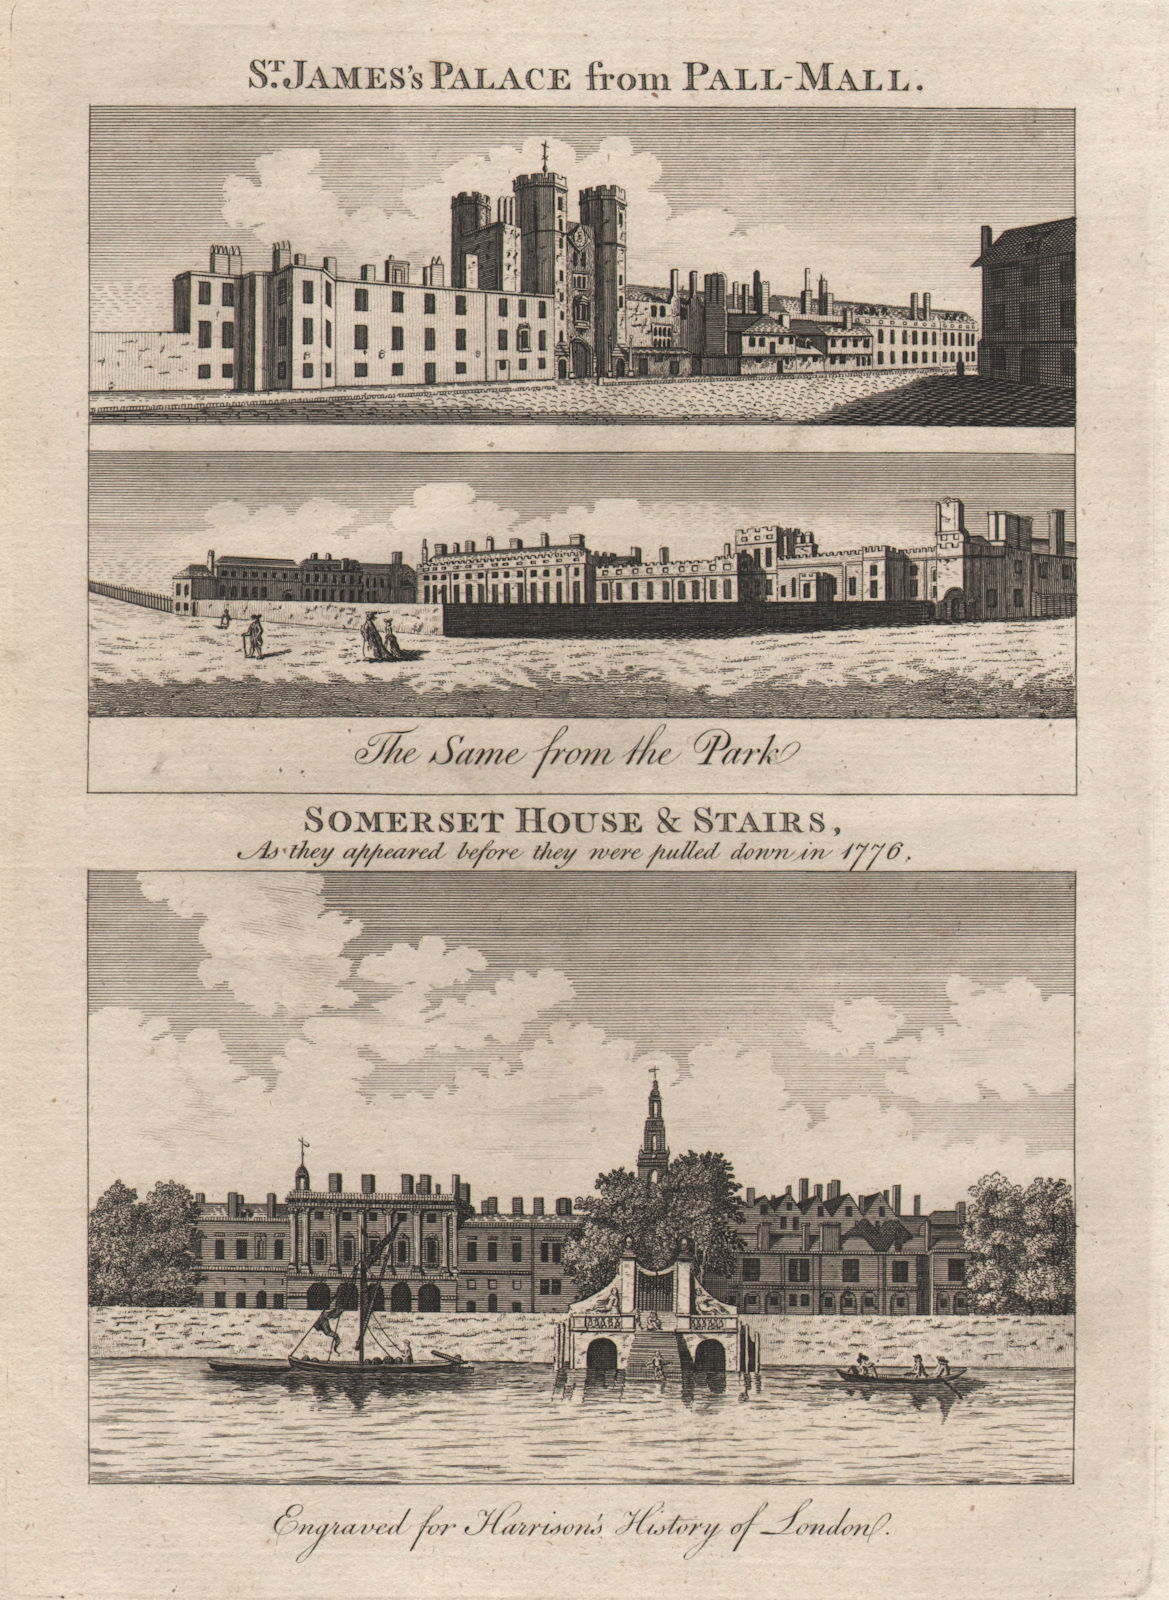 Associate Product St James's Palace from Pall Mall/ St James's Park. Somerset House. HARRISON 1776